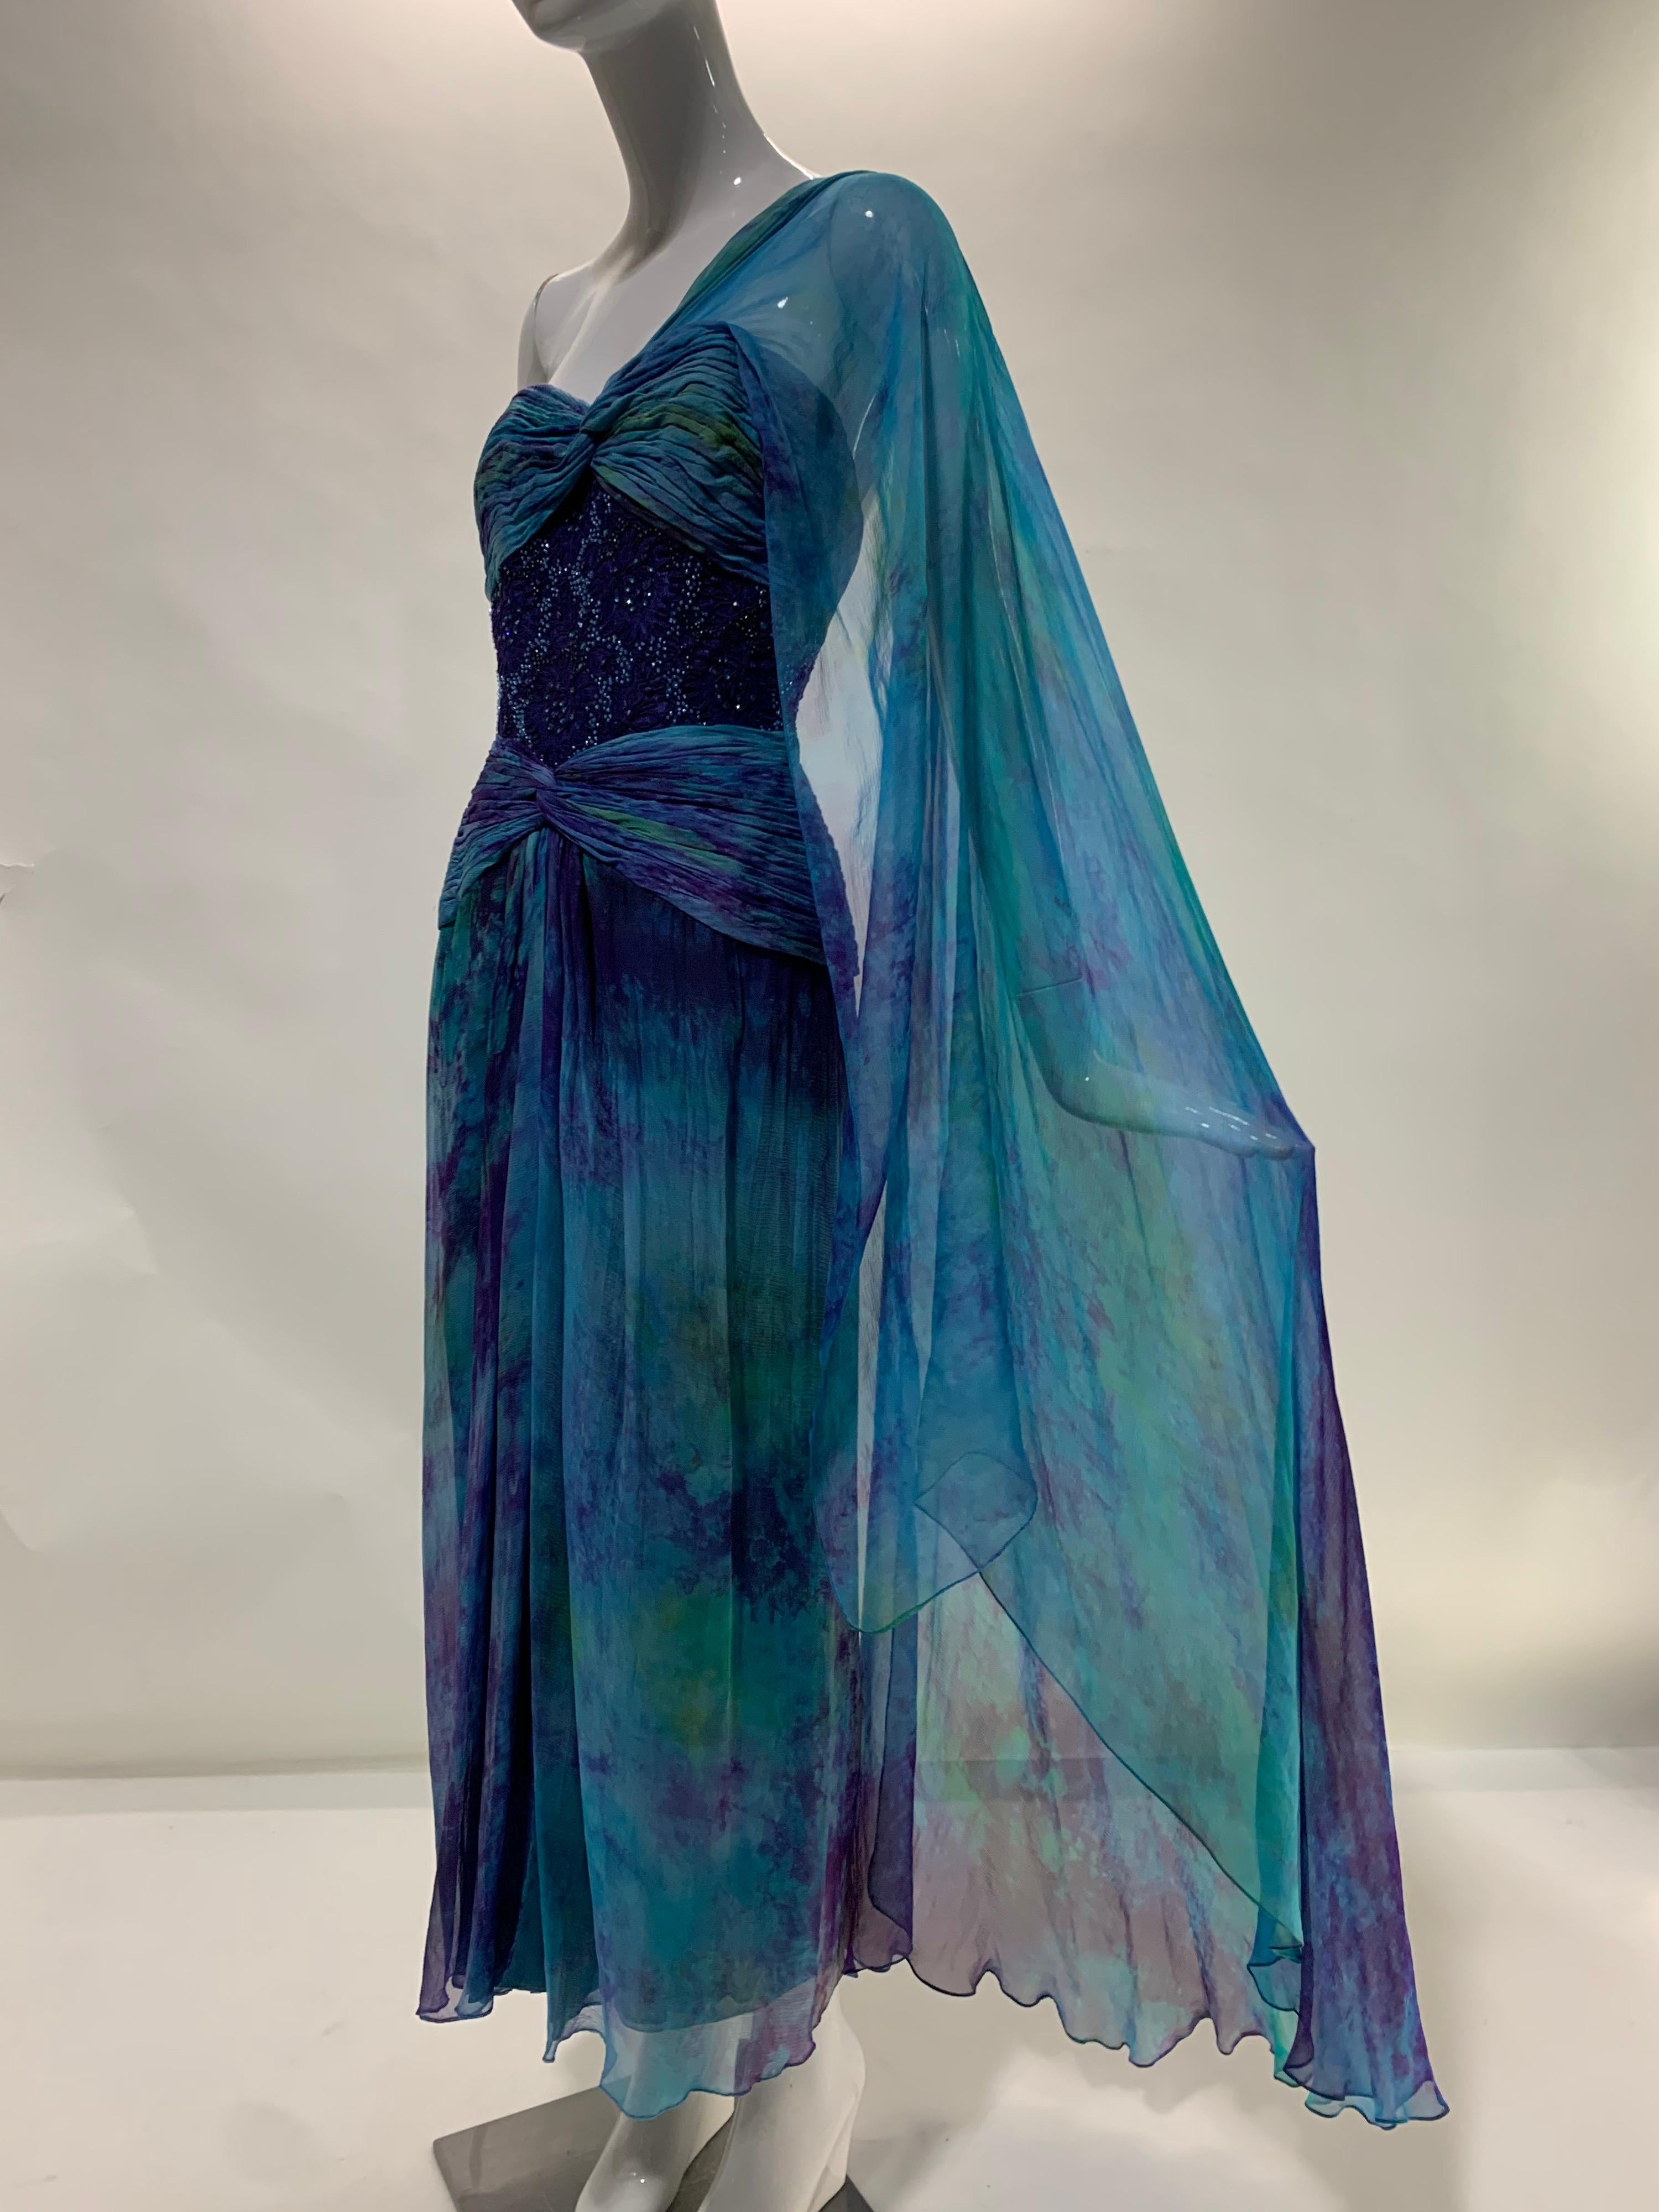 A beautiful 1990s Couture Michael Casey purple turquoise and aqua tie-dyed silk chiffon and beaded royal purple Belgian lace. Structured and boned bodice goddess gown with shoulder draped foulard. Incredible numbered piece from designer's private